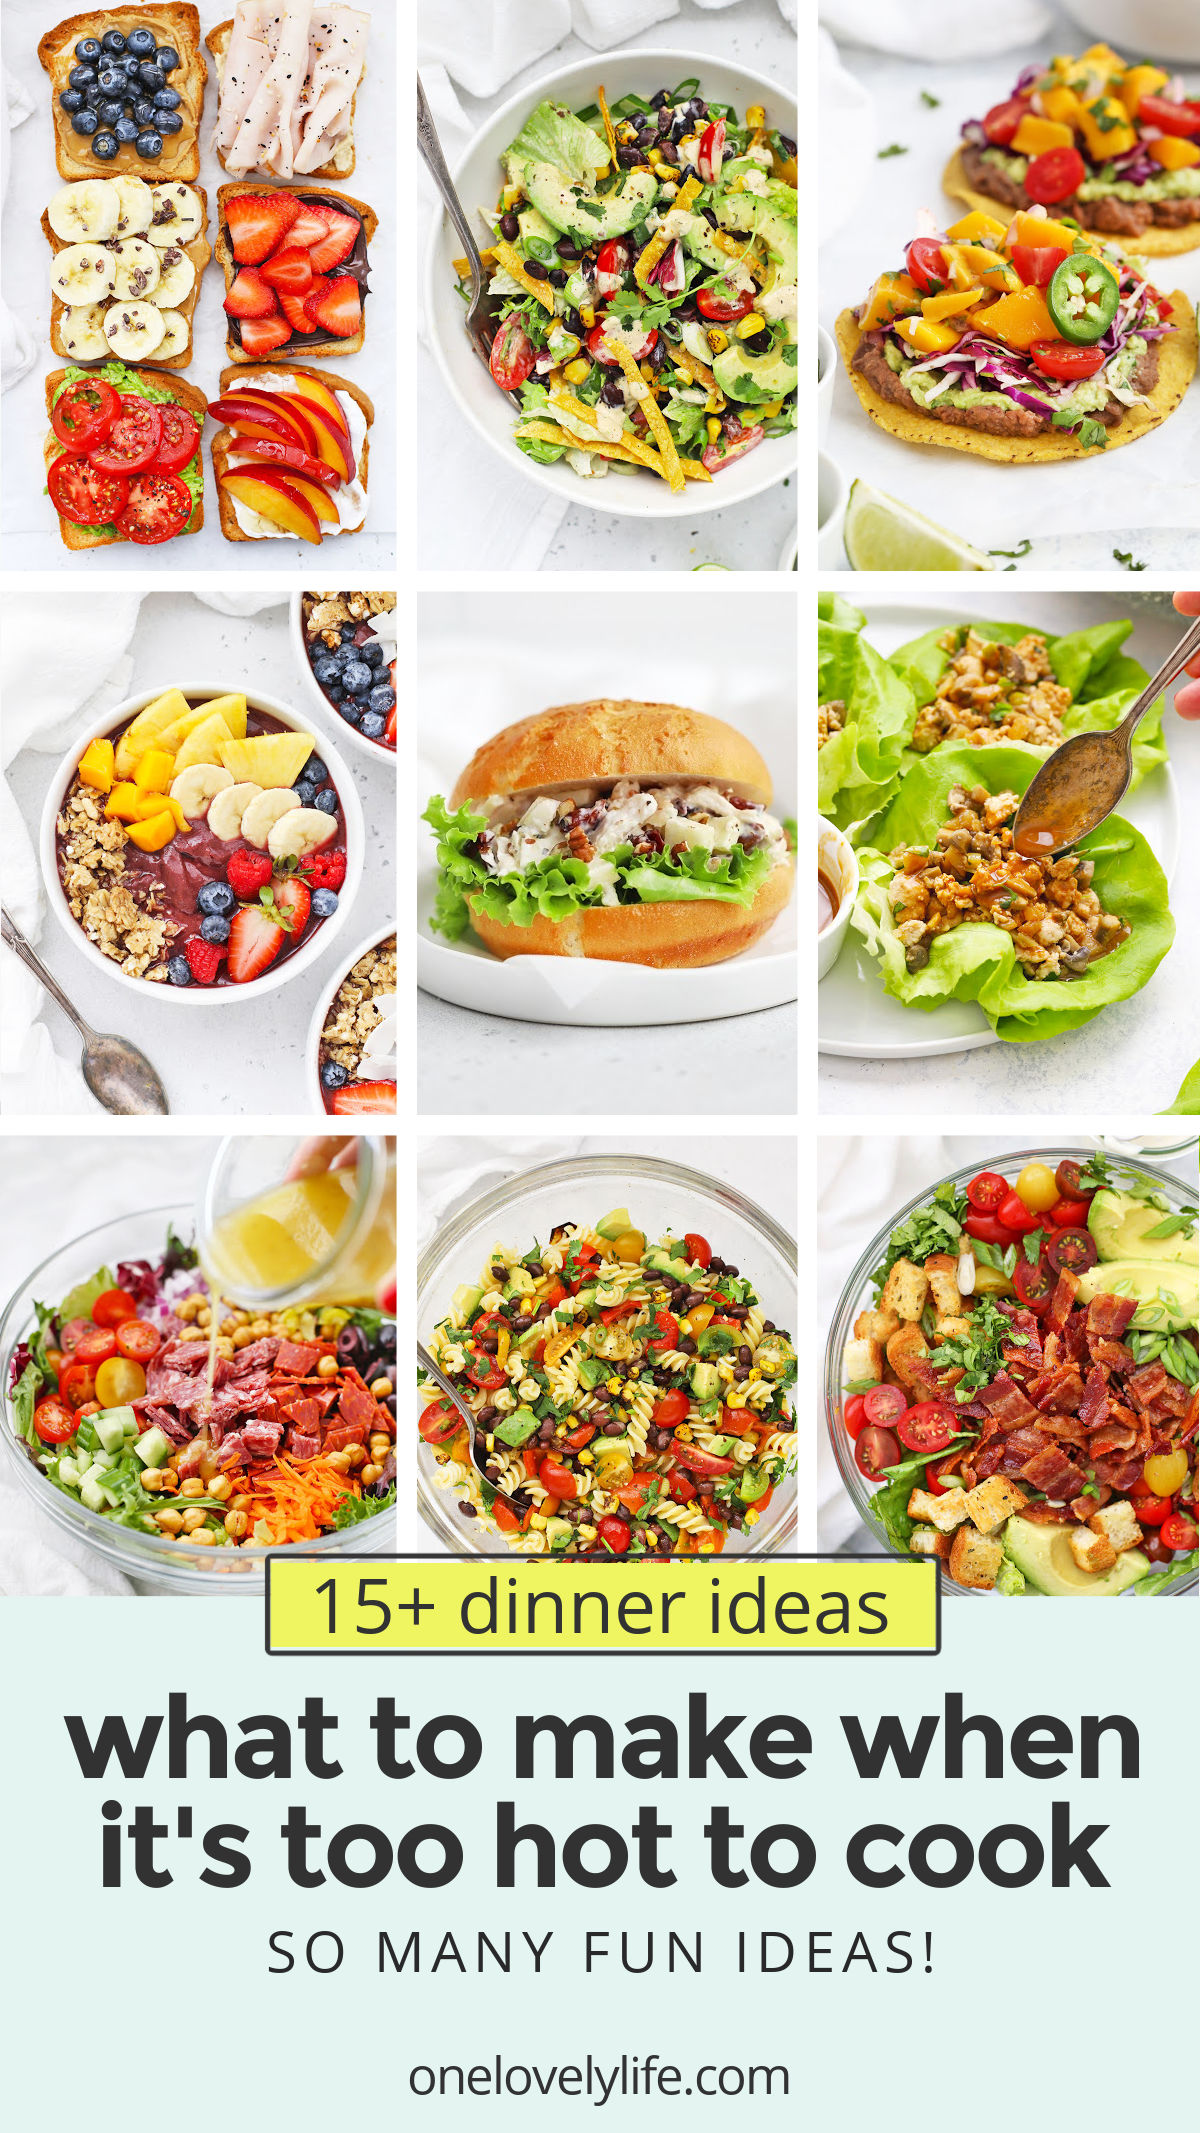 15+ Recipes to Make When It's Too Hot to Cook. These Low-Cook and No-Cook Dinners are Perfect for a Hot Day! Gluten-Free, Dairy-Free, Vegan, and Paleo Options Included! // No Cook Meals // No Cook Dinners // Summer Dinner Ideas // Dinner Ideas For Hot Weather // What To Eat When It's Too Hot To Cook // Healthy Summer Dinners